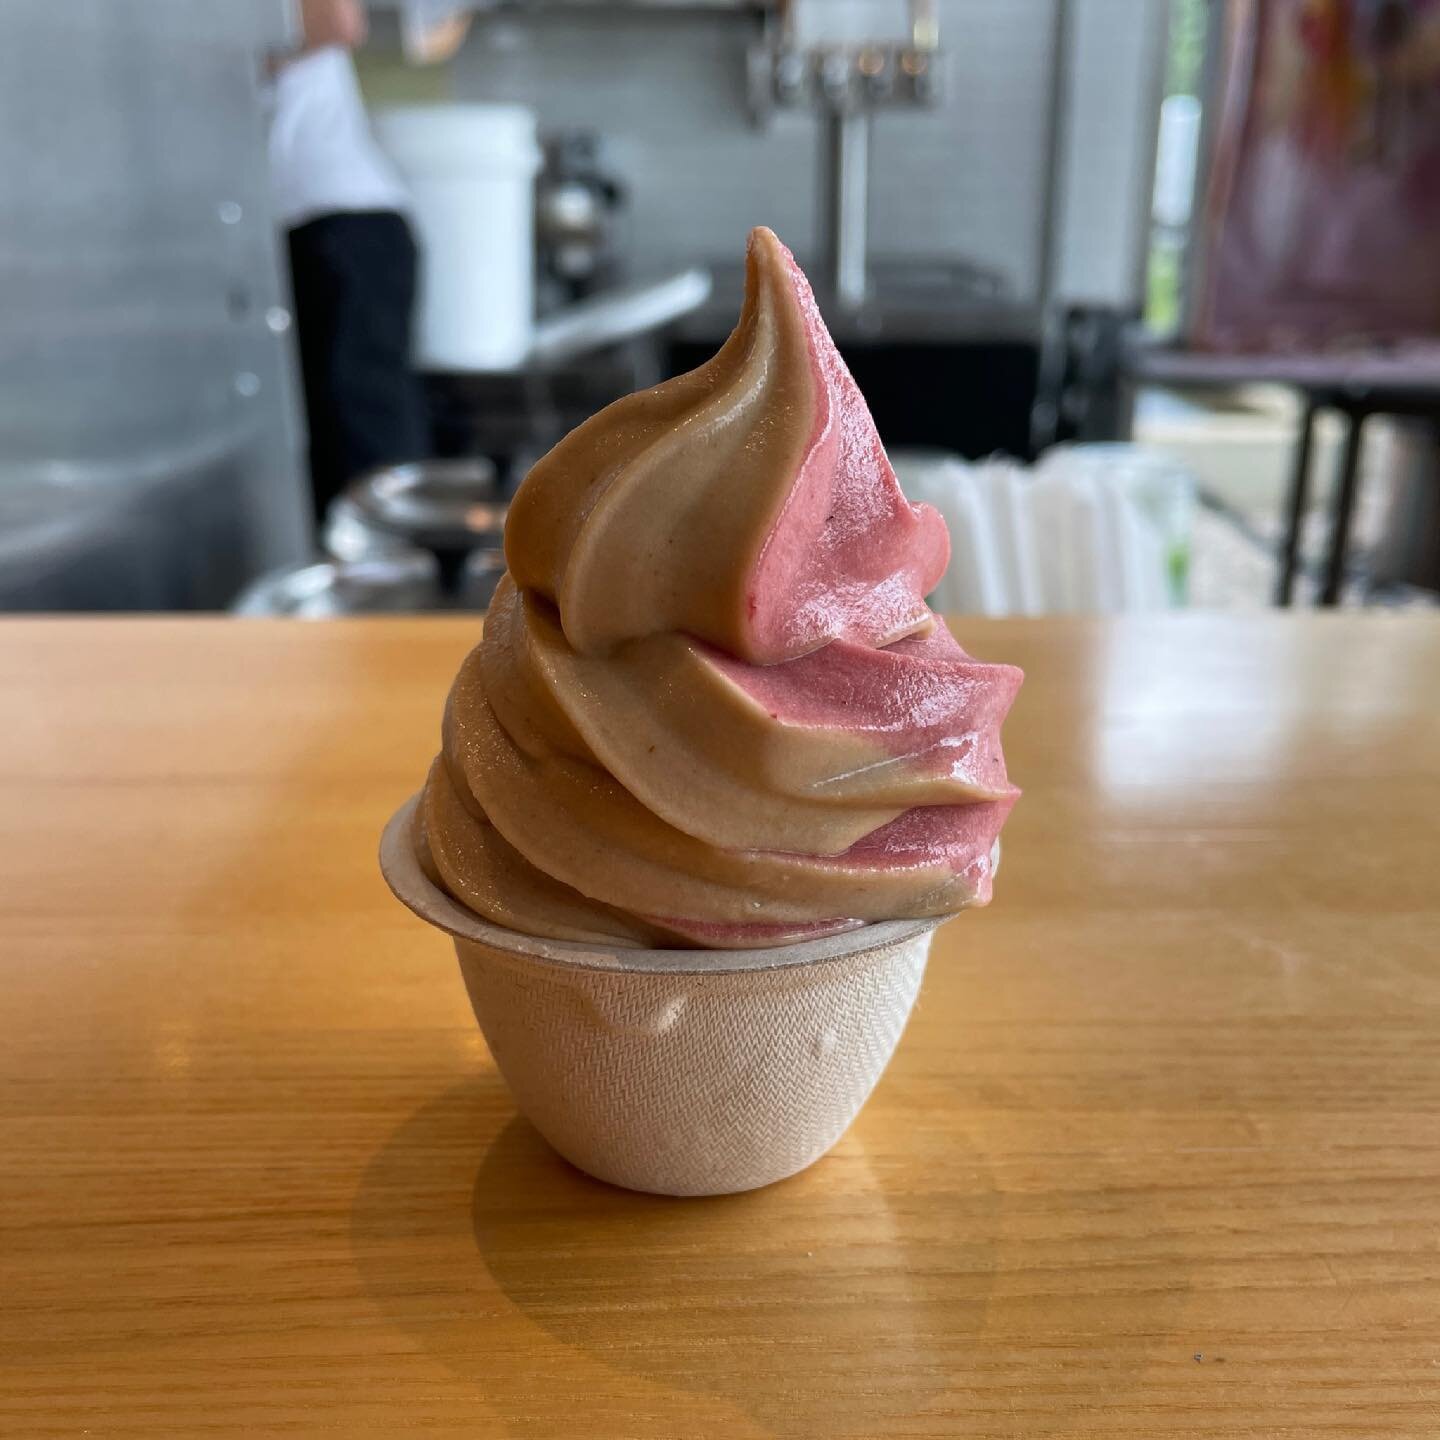 Peanut Butter and Strawberry Jam Soft Serve (vegan). Coming soon.